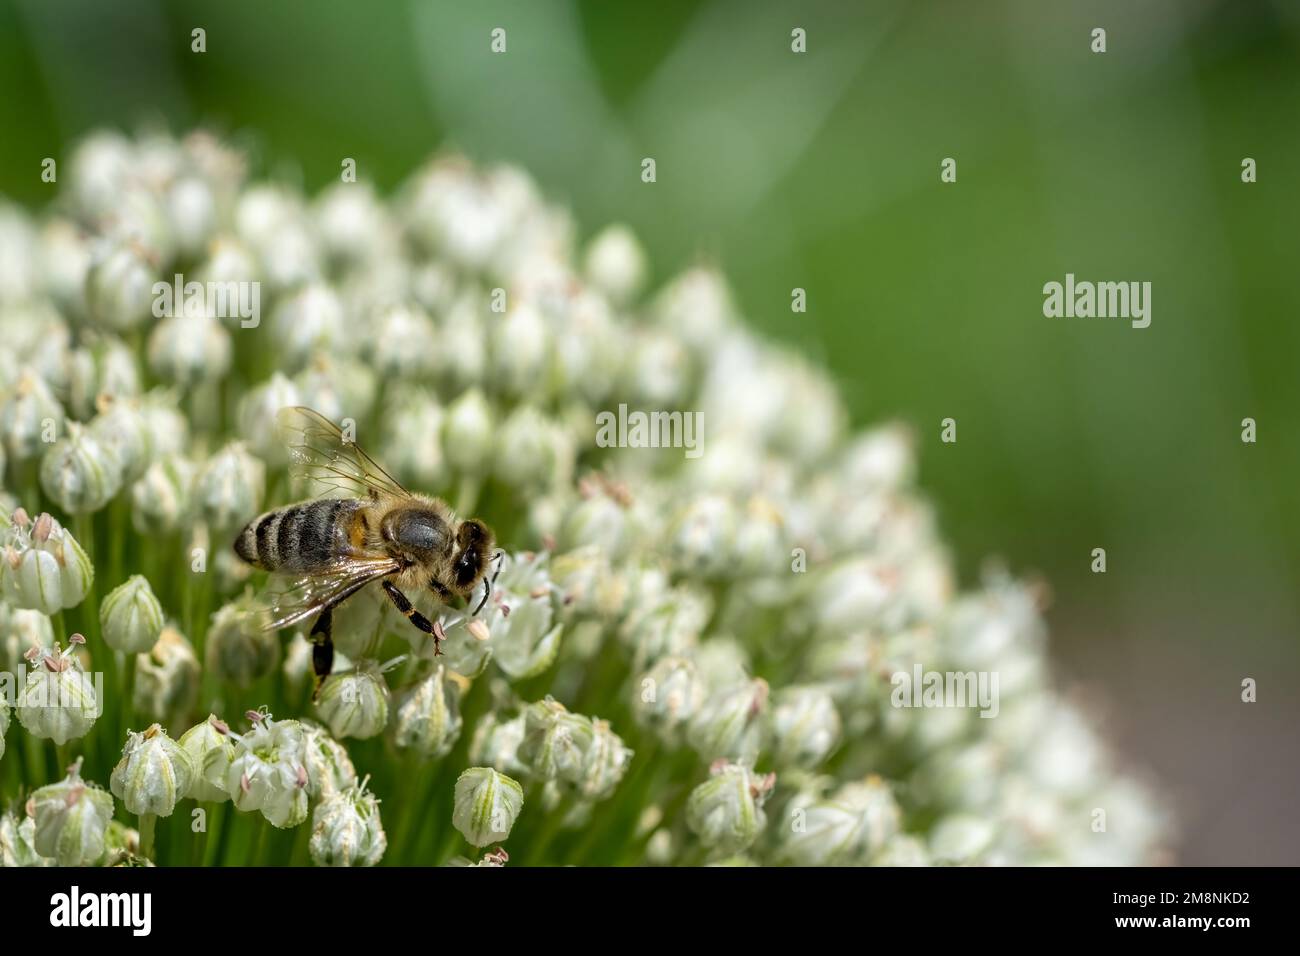 Issaquah, Washington, USA.  Onion seedhead (gone to seed), being pollinated by a honeybee. Stock Photo